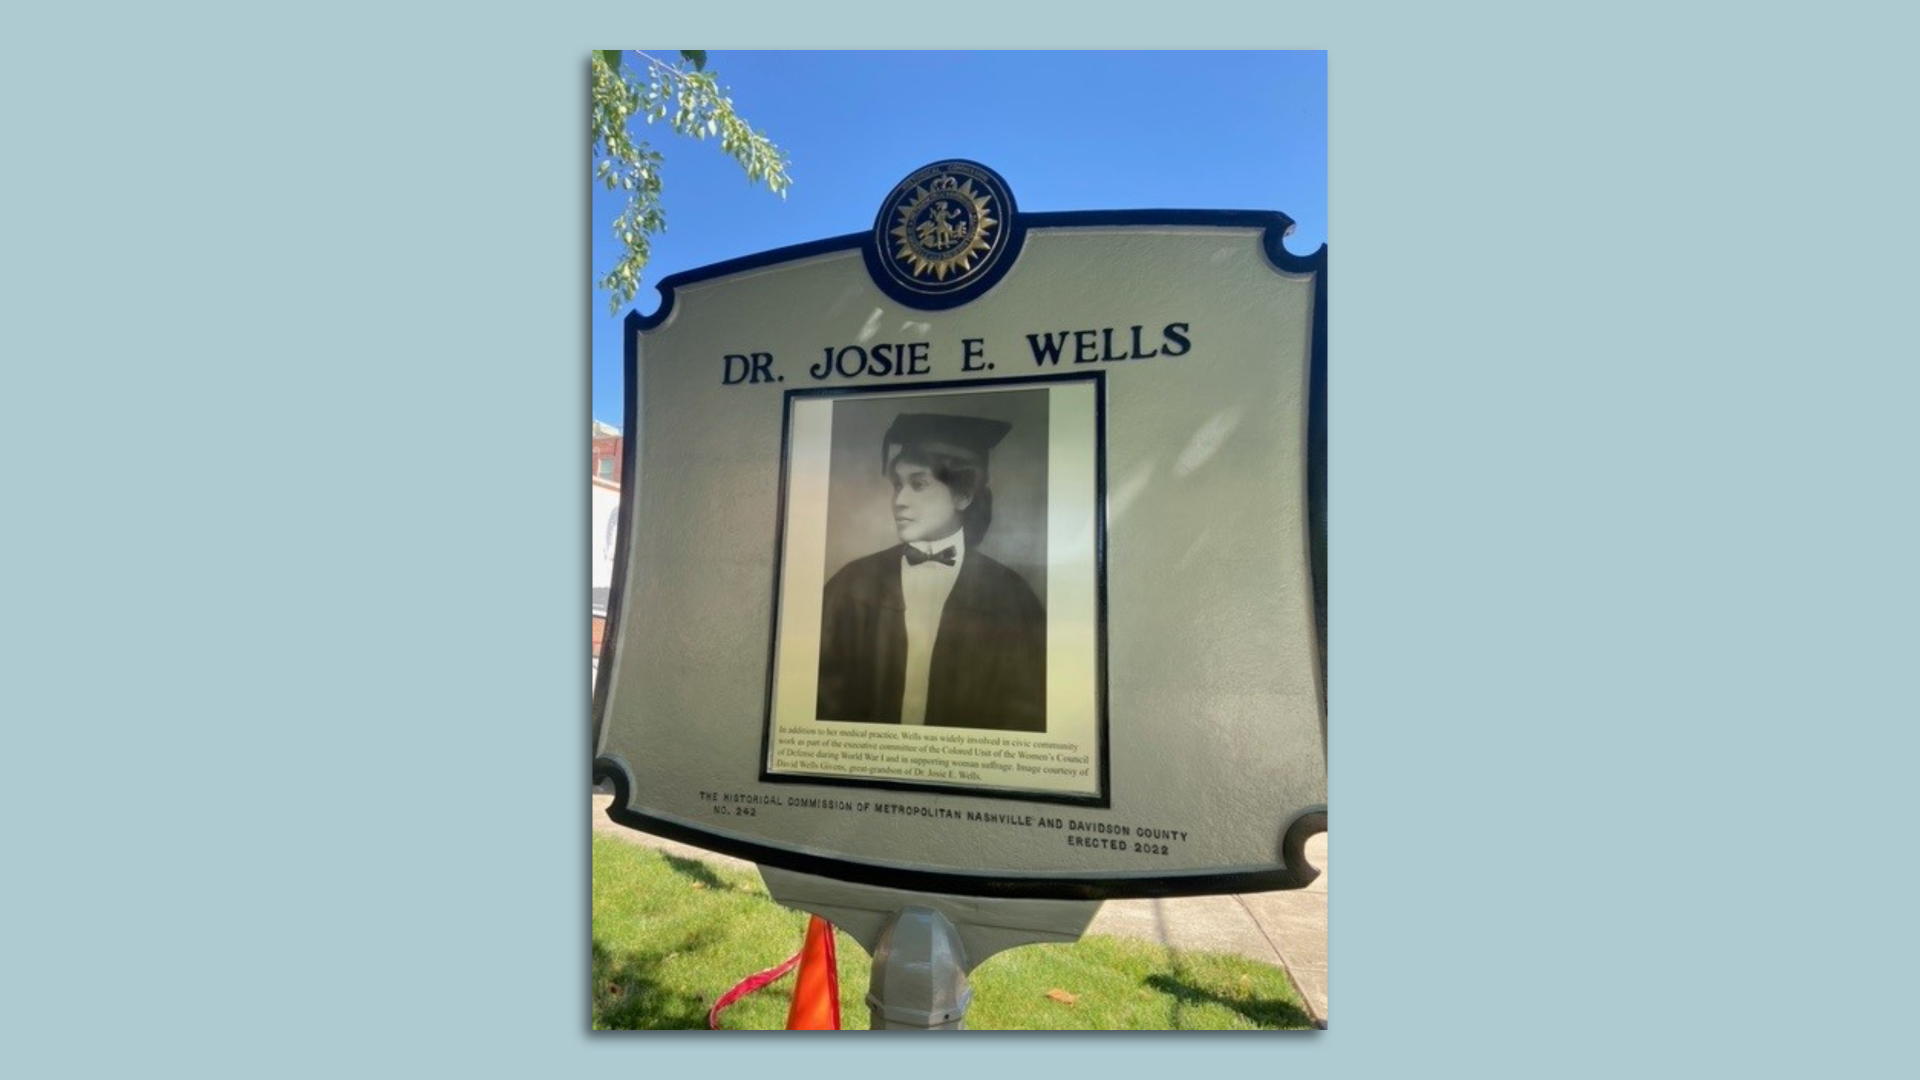 A historical marker for Dr. Josie E. Wells.